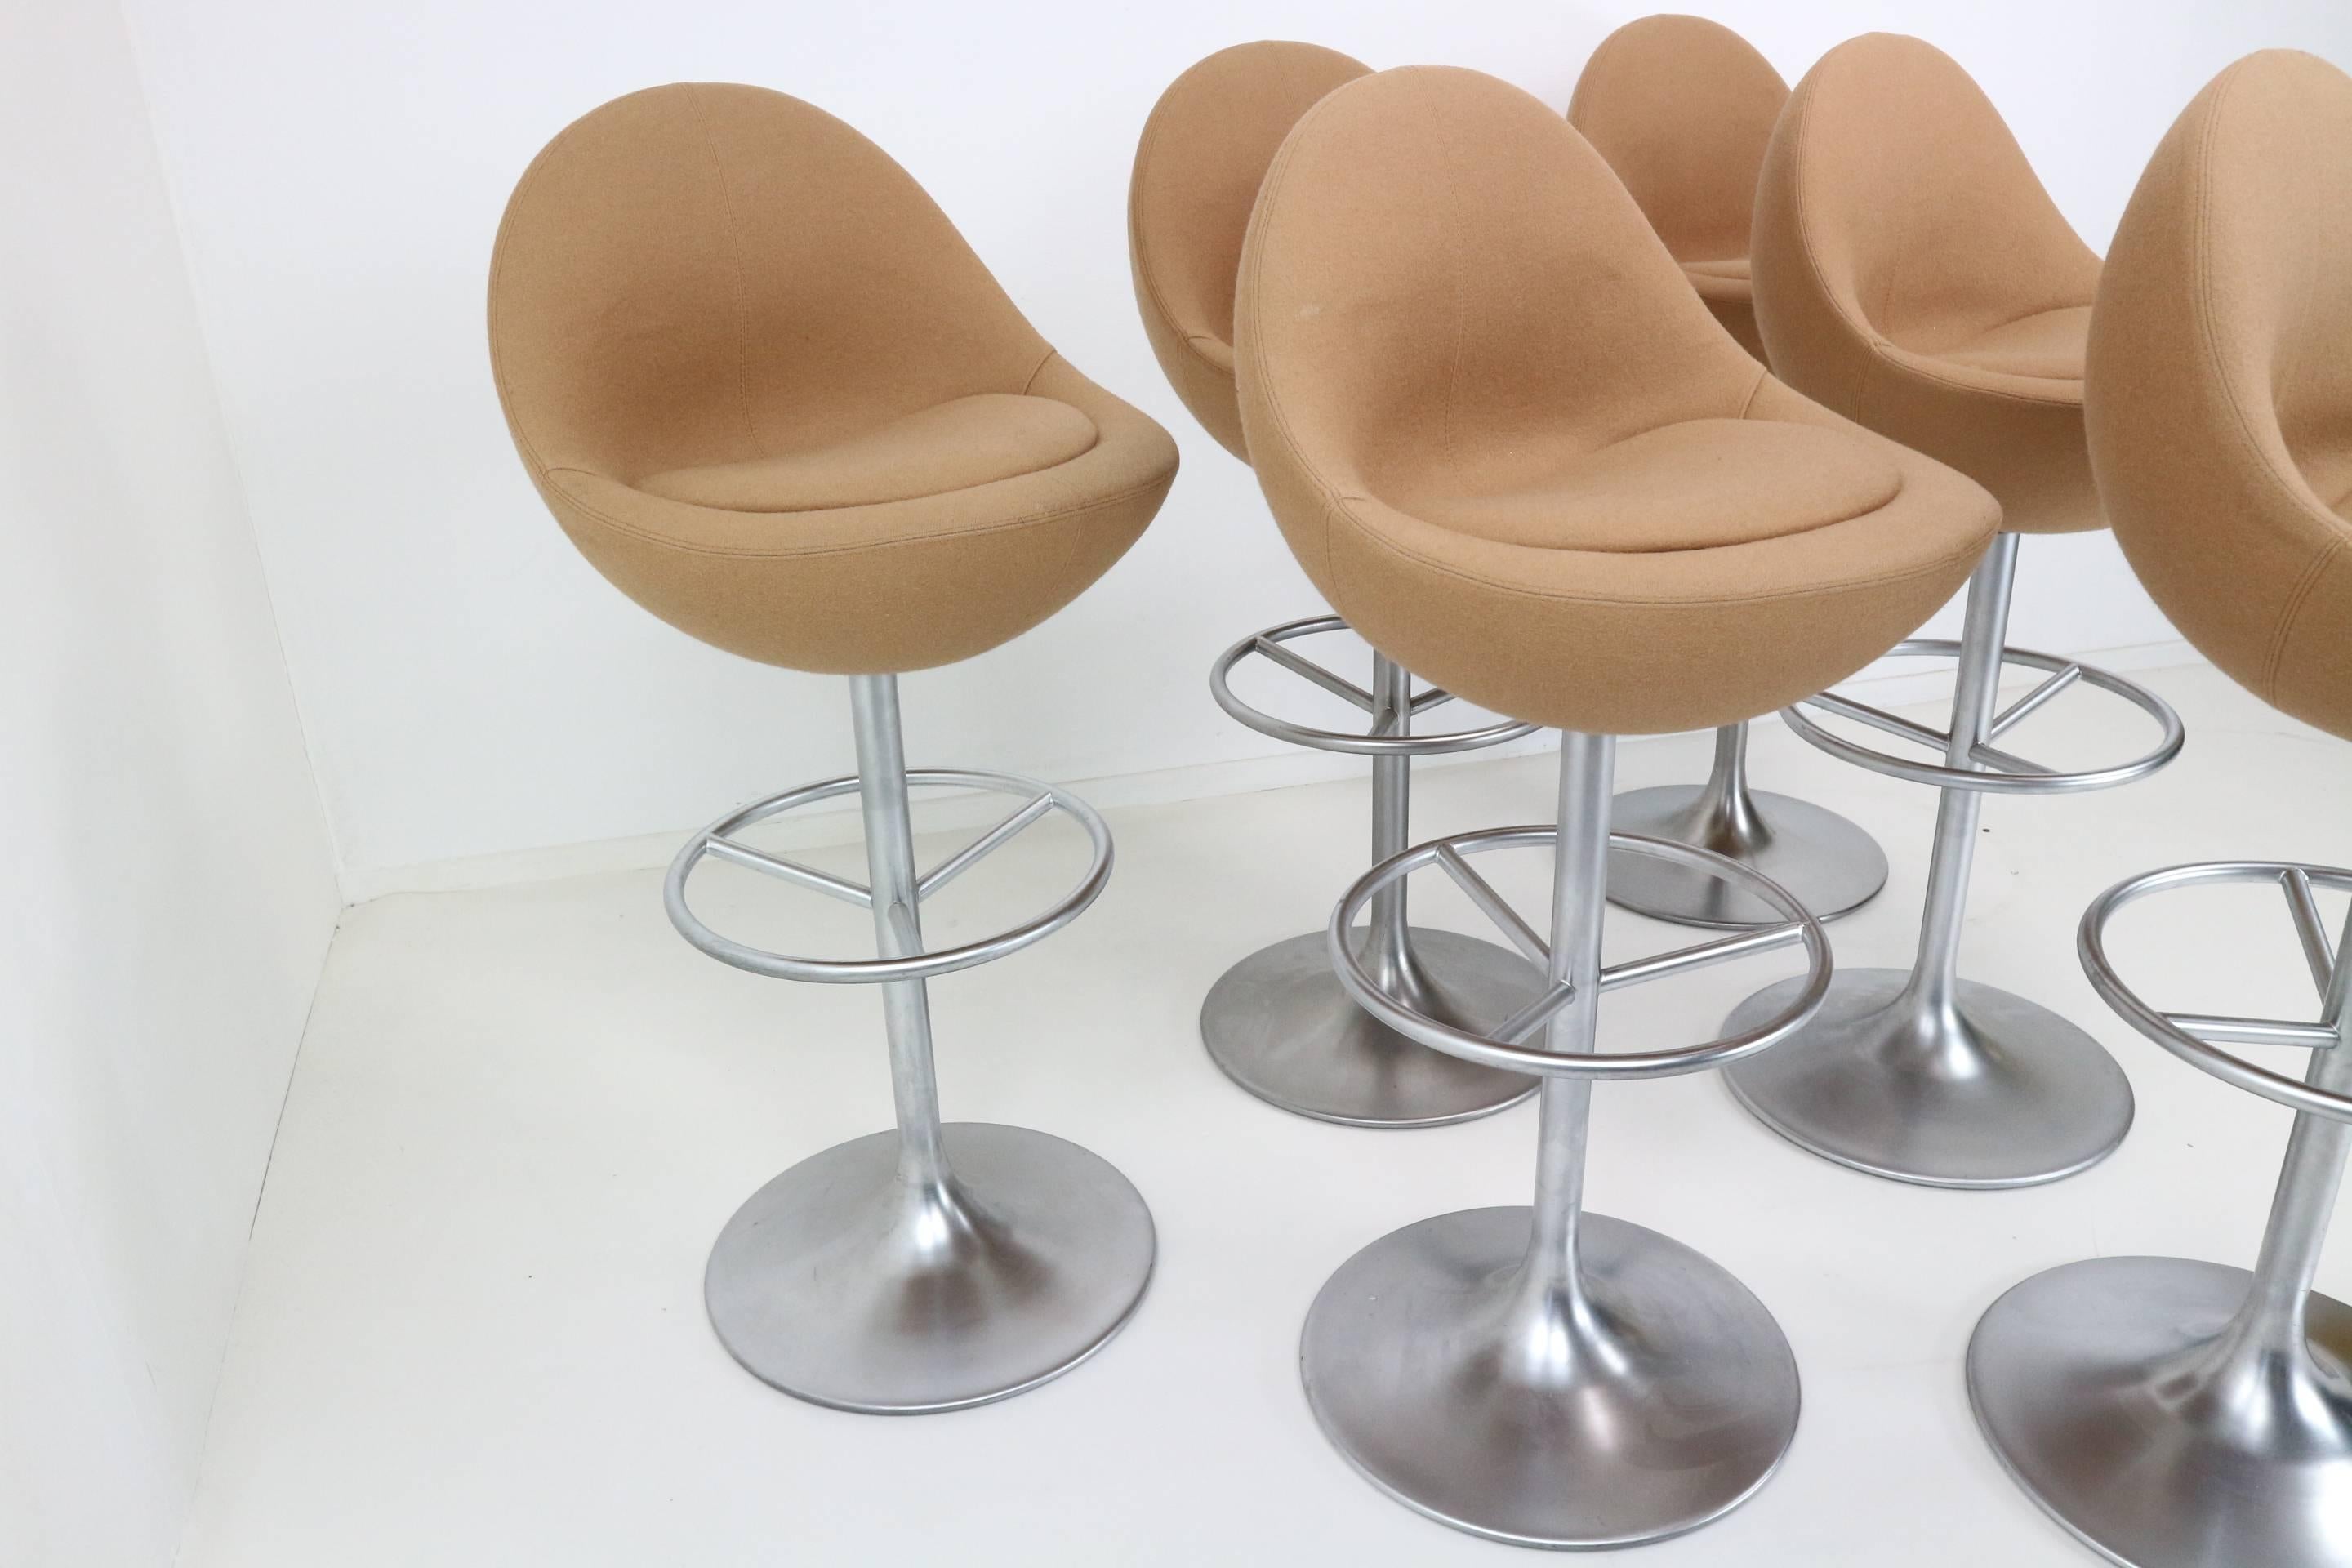 Thee sets of two Venus barstools designed by B. Johanson and manufactured by Johanson Design in Sweden, 1960s. Aluminium plating trompet feet and wool Kvadrat upholstery on the seating. We also have six armchairs 'Comet' in stock, in the same